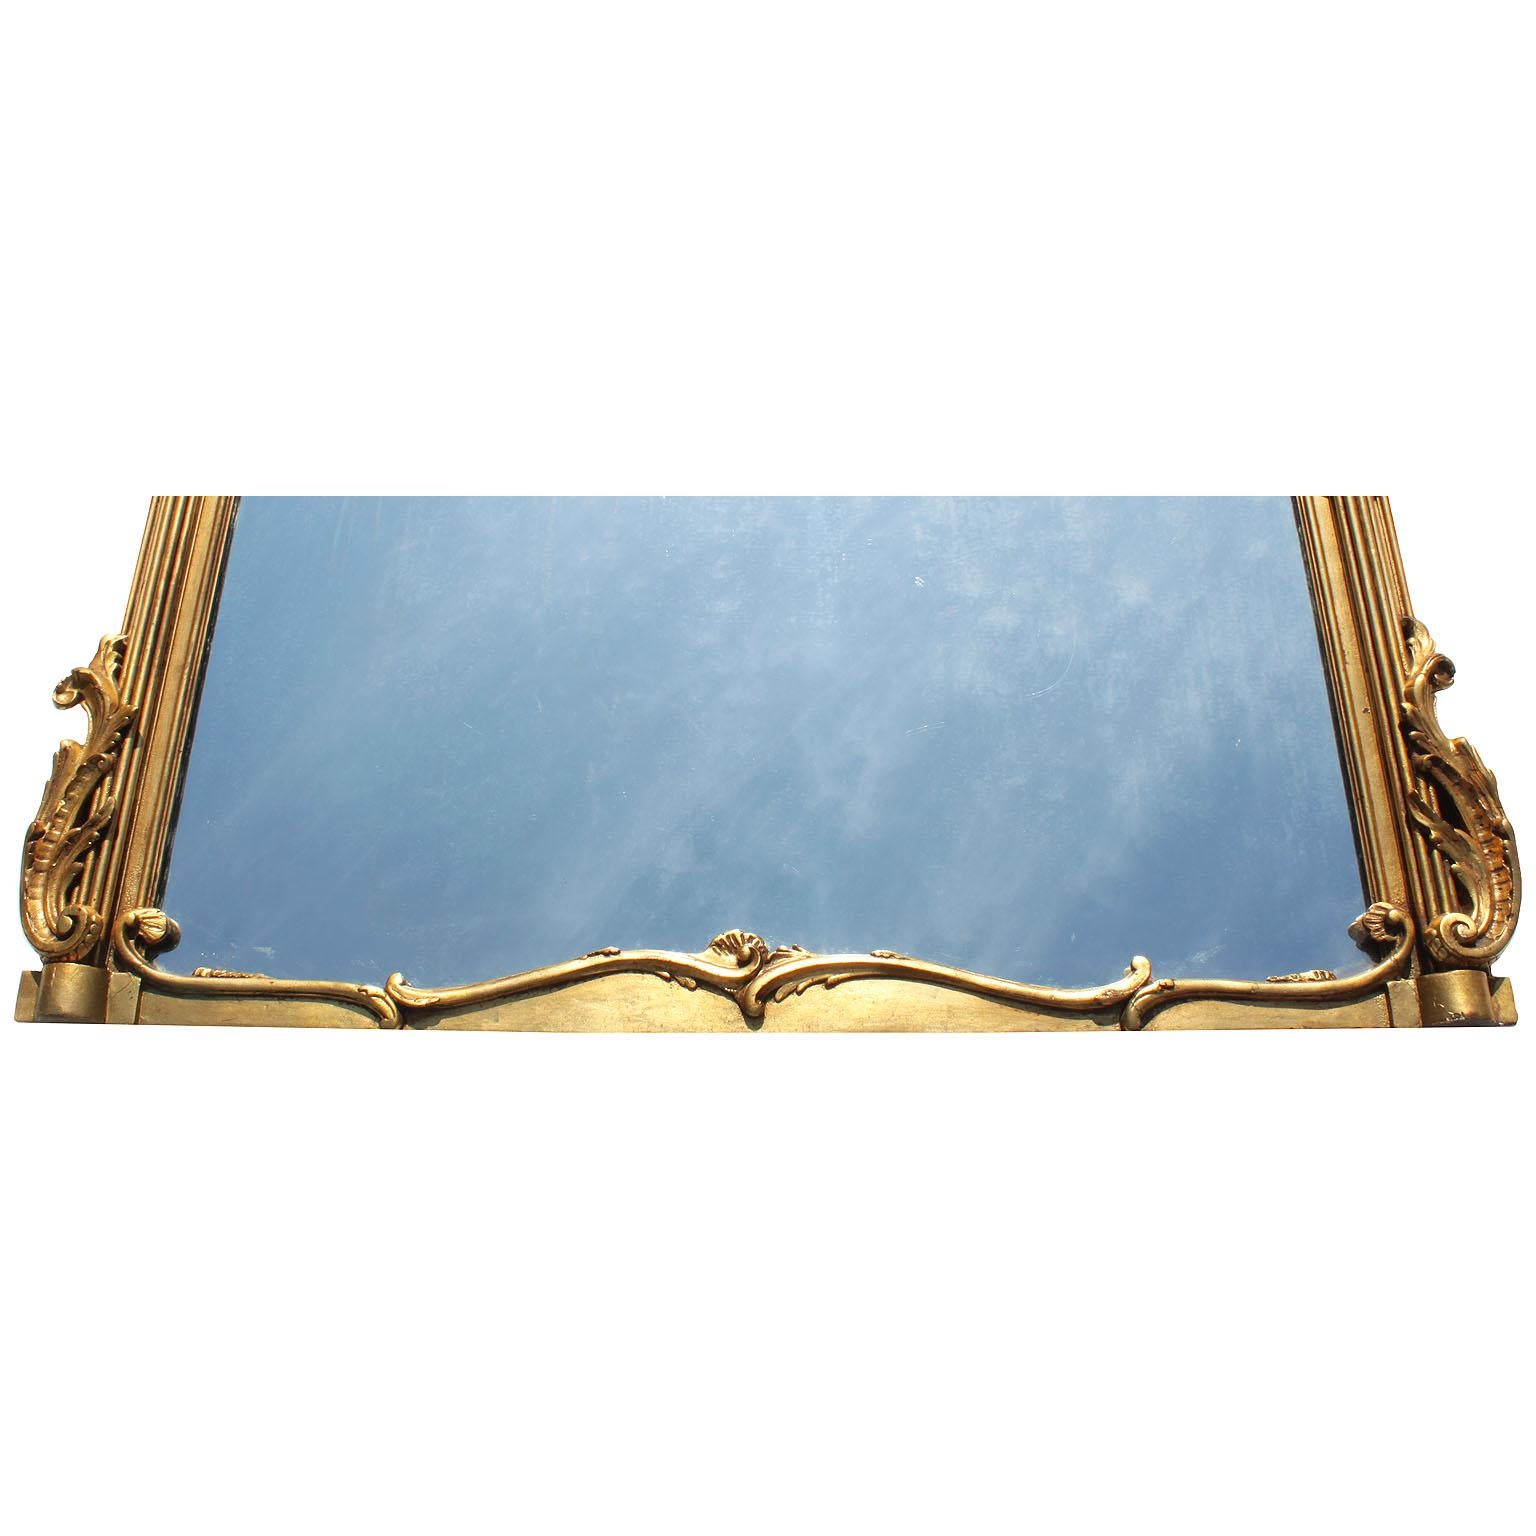 French 19th-20th Century Louis XV Style Giltwood Carved Trumeau Mirror Frame For Sale 1